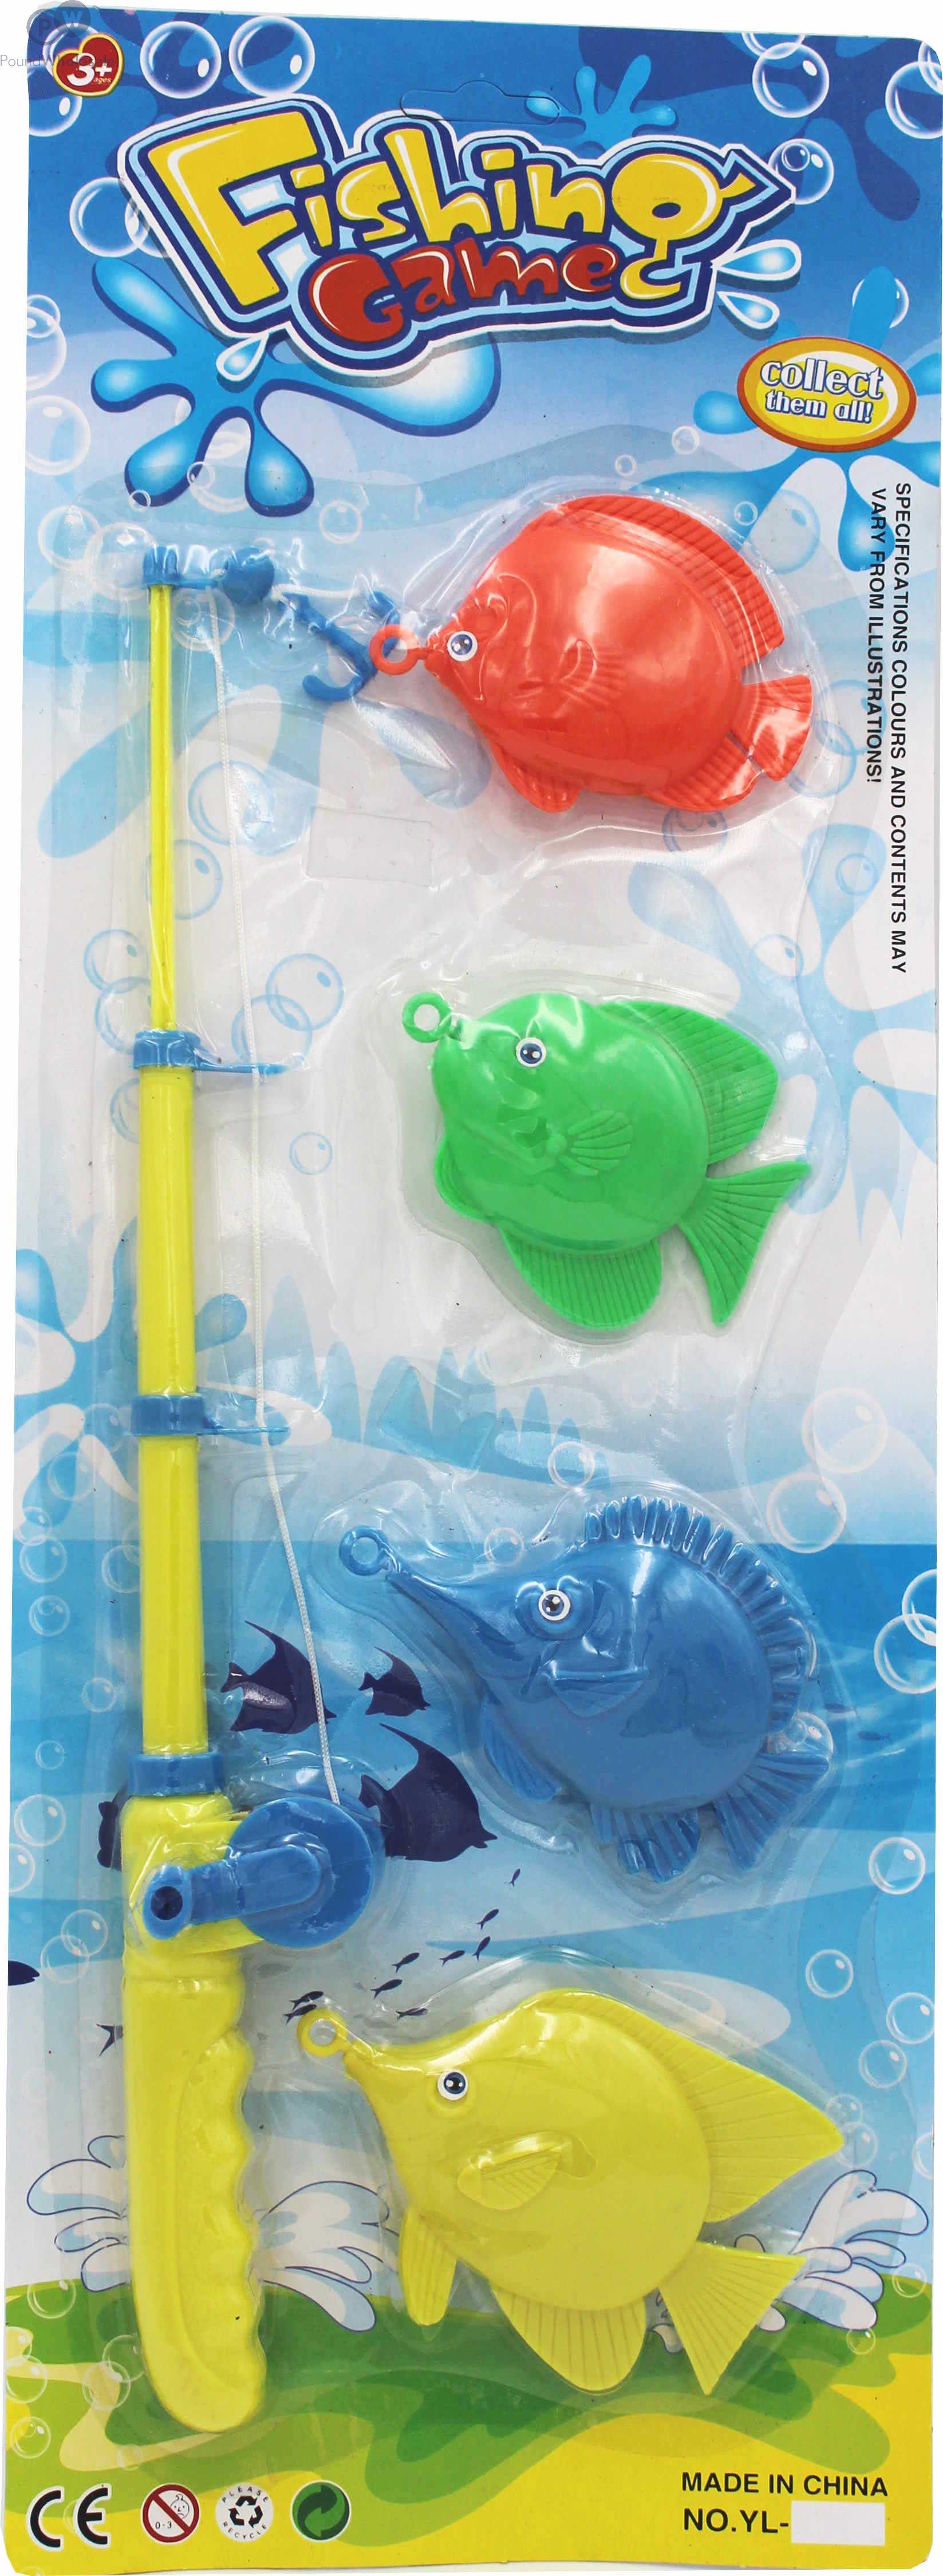 FISHING TOY GAME SET WITH 4 FISH